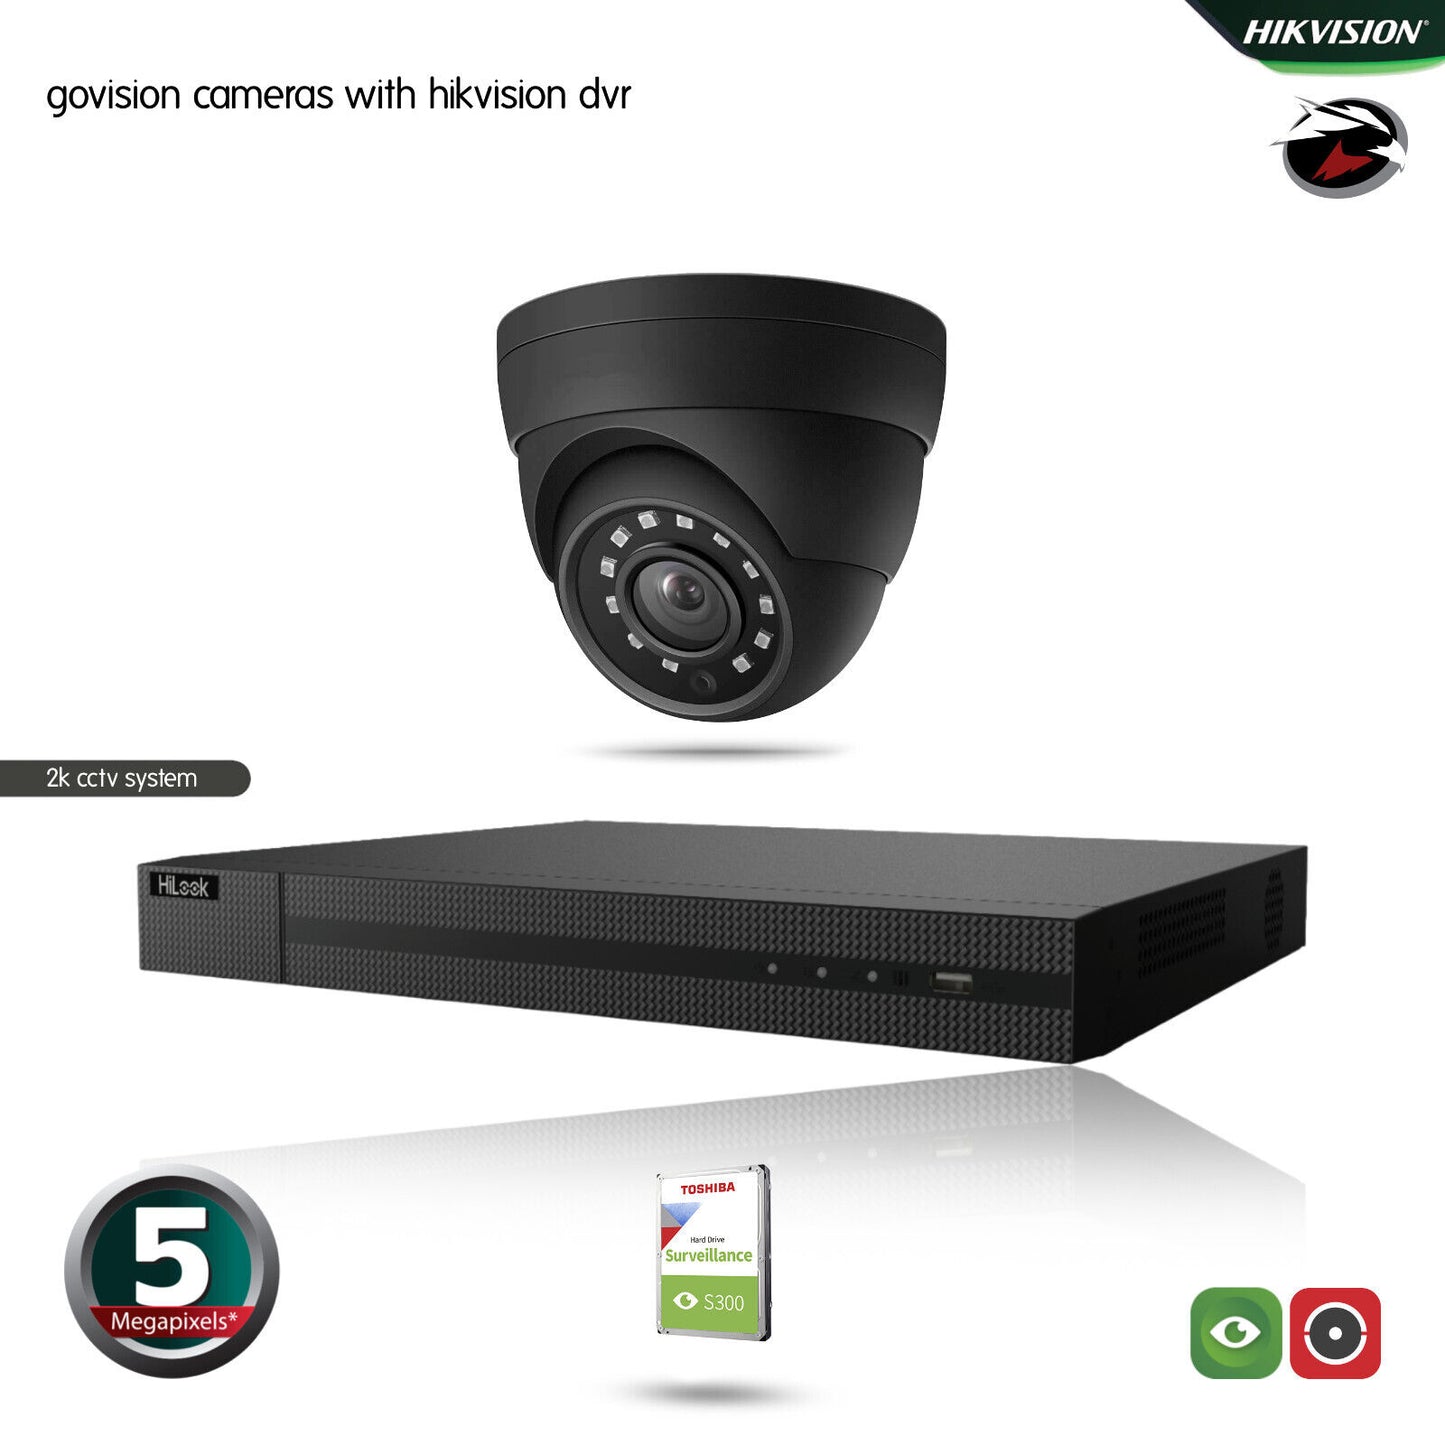 HIKVISION HILOOK CCTV SYSTEM 5MP DVR OUTDOOR NIGHTVISION SECURITY HD CAMERA KIT 4CH DVR 1xCameras 1TB HDD